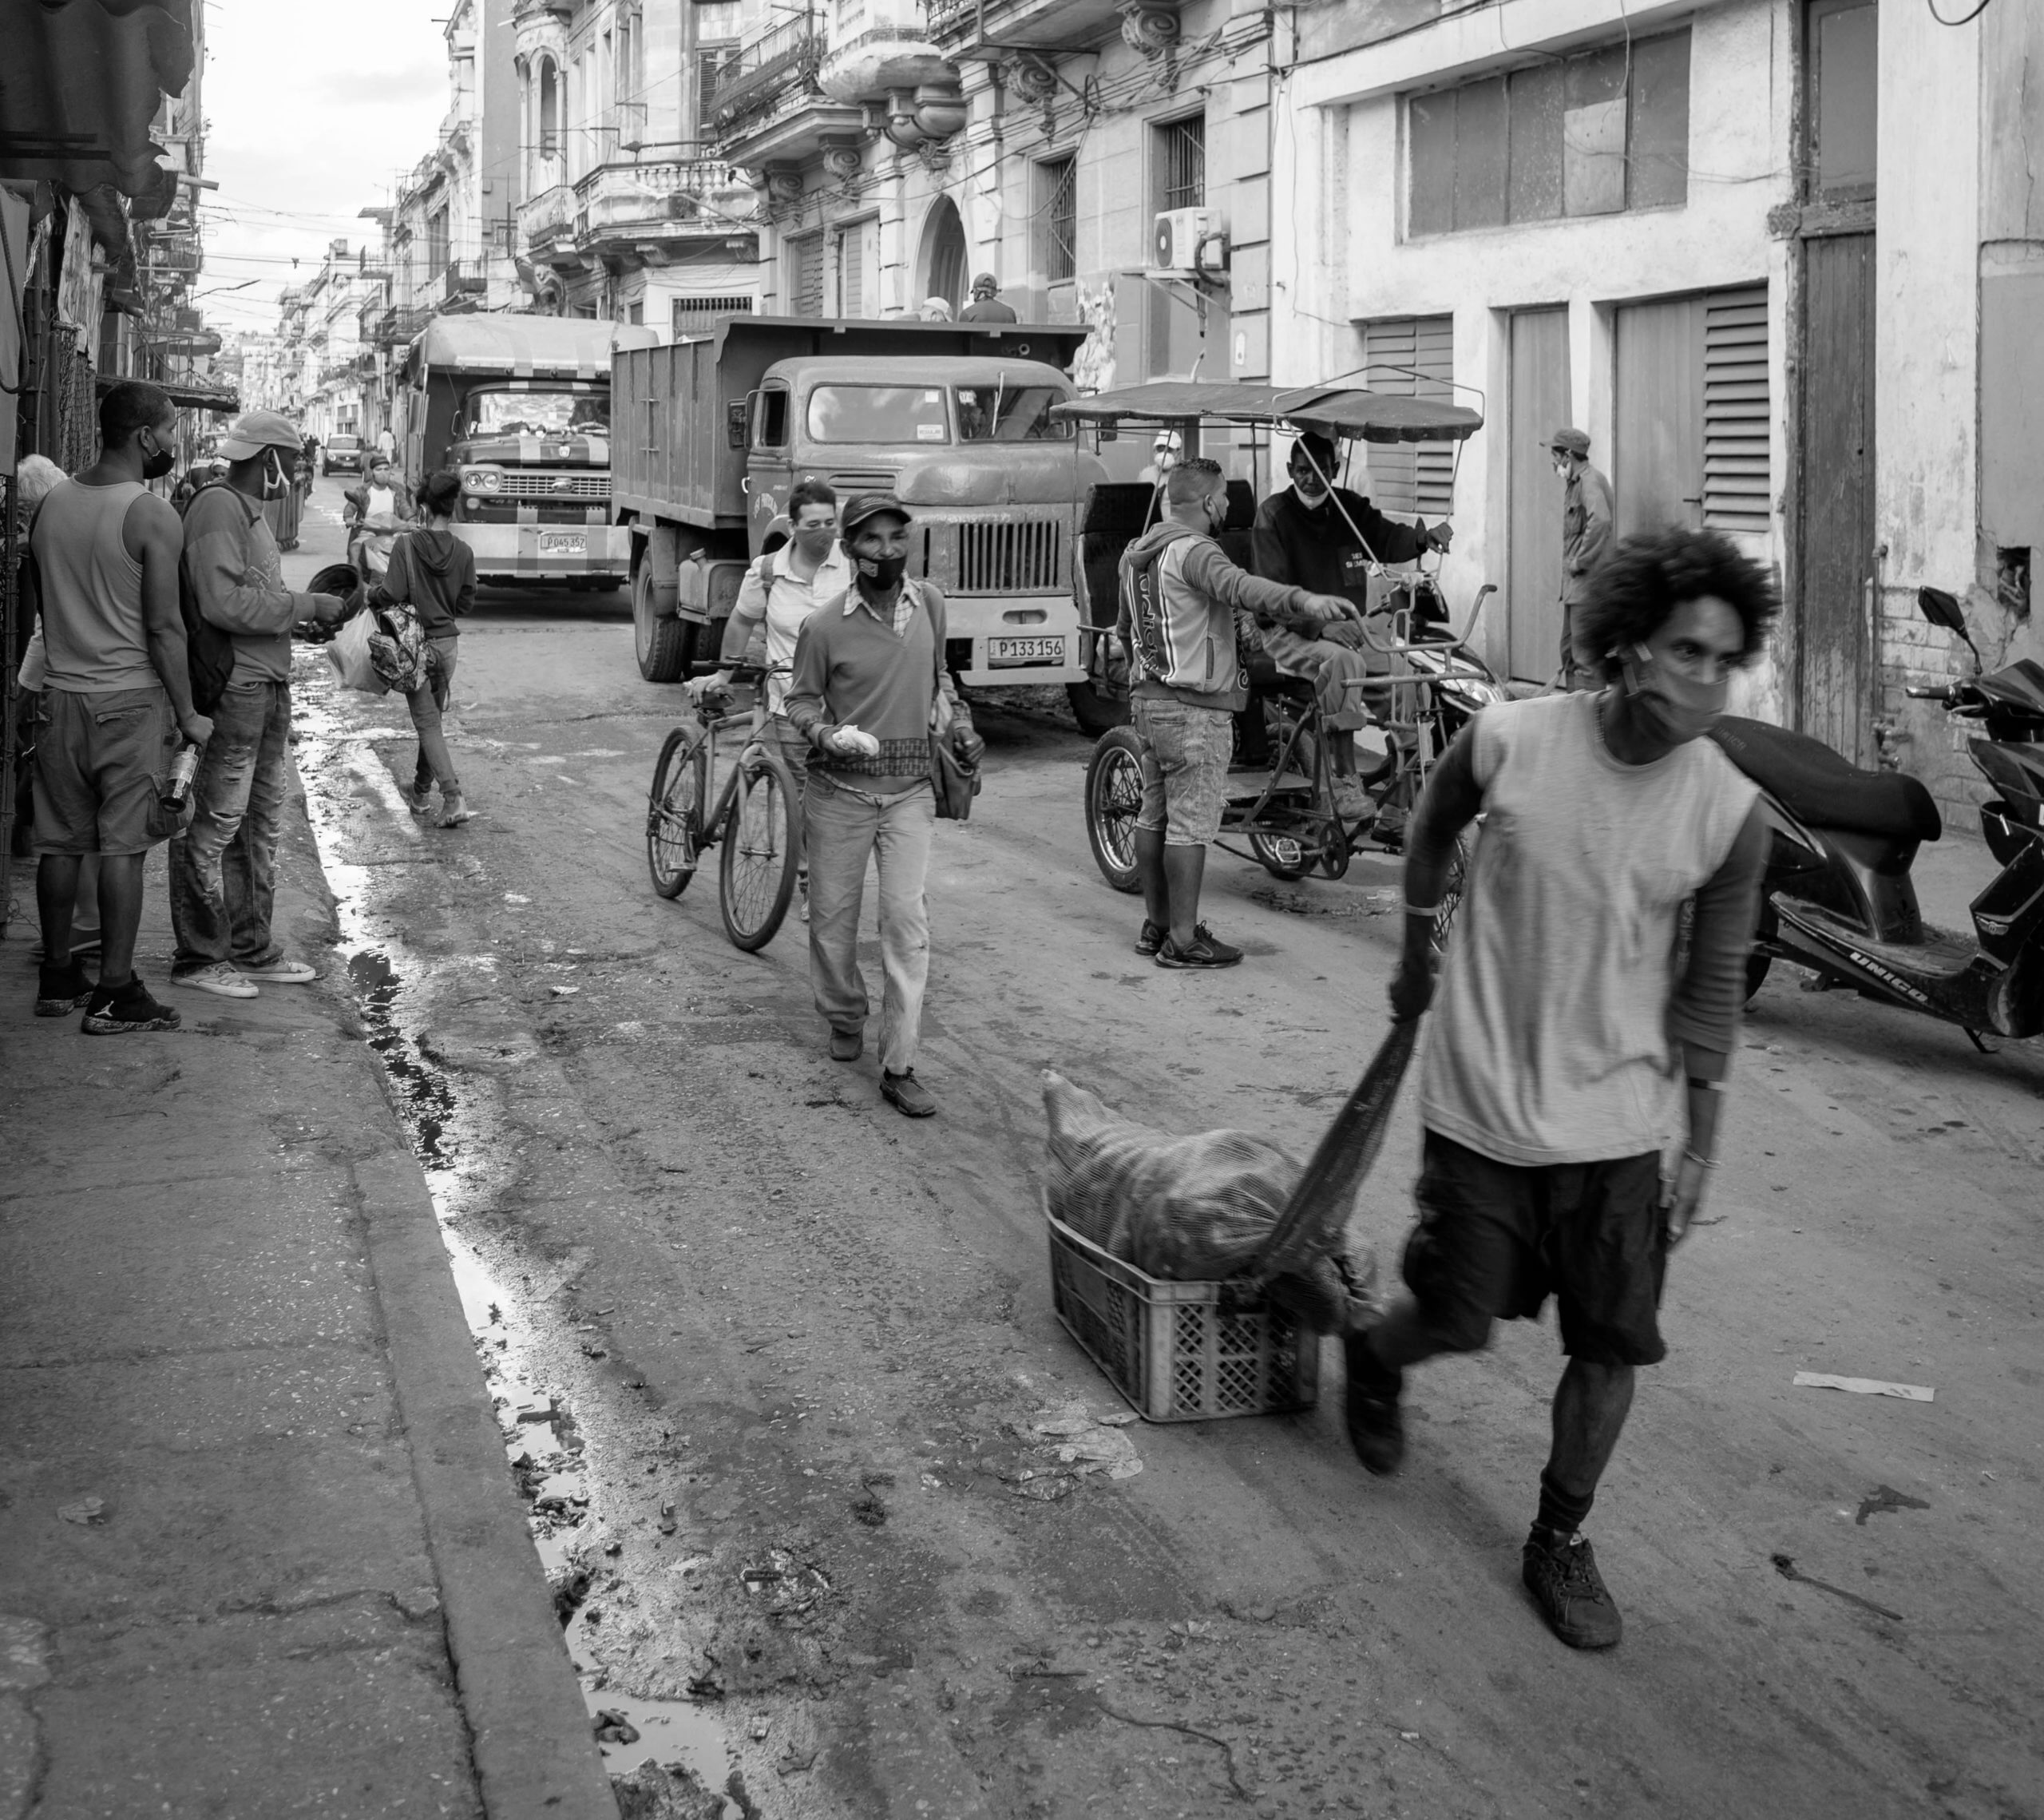 Cubans continue to struggle under adverse economic conditions, as evidenced by this scene in the Habana Centro district of the capital. © 2022 John D. Elliott • www.TheHumanPulse.com